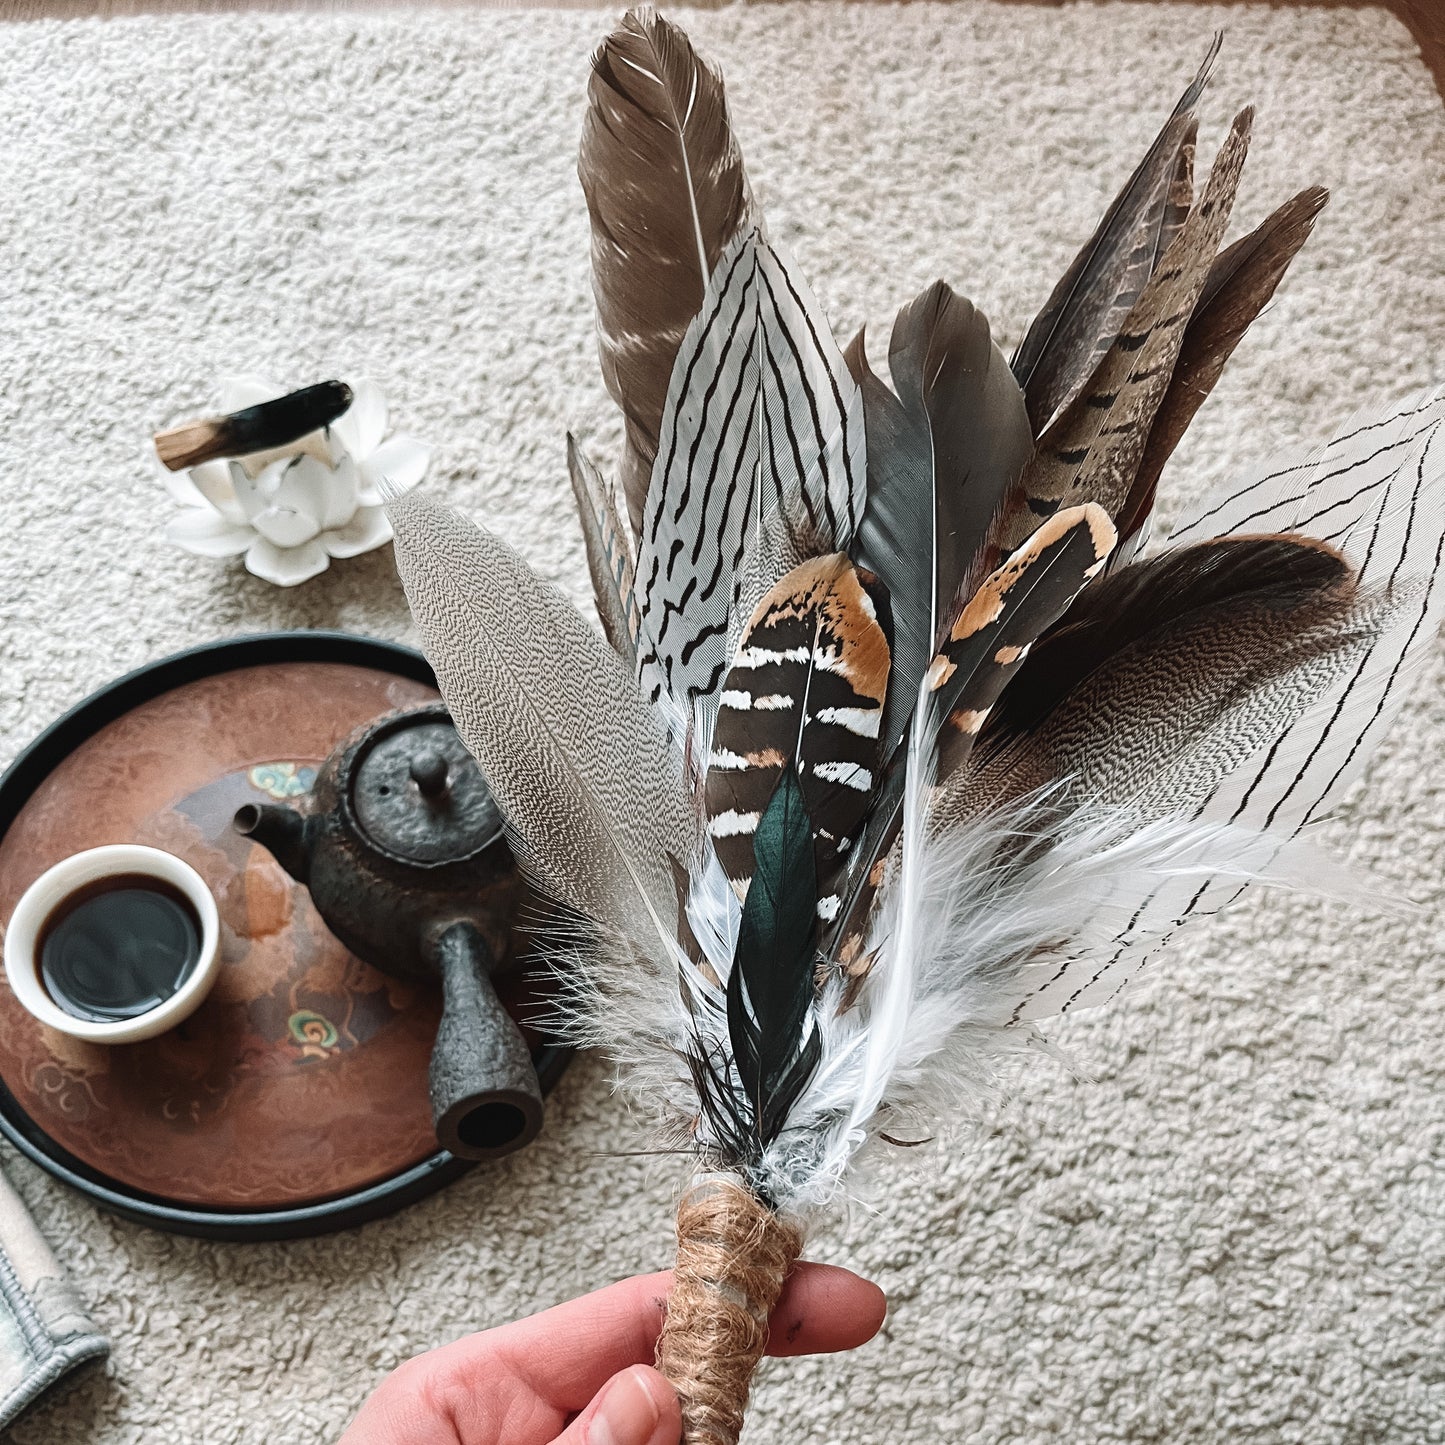 Smudge Feather Fan